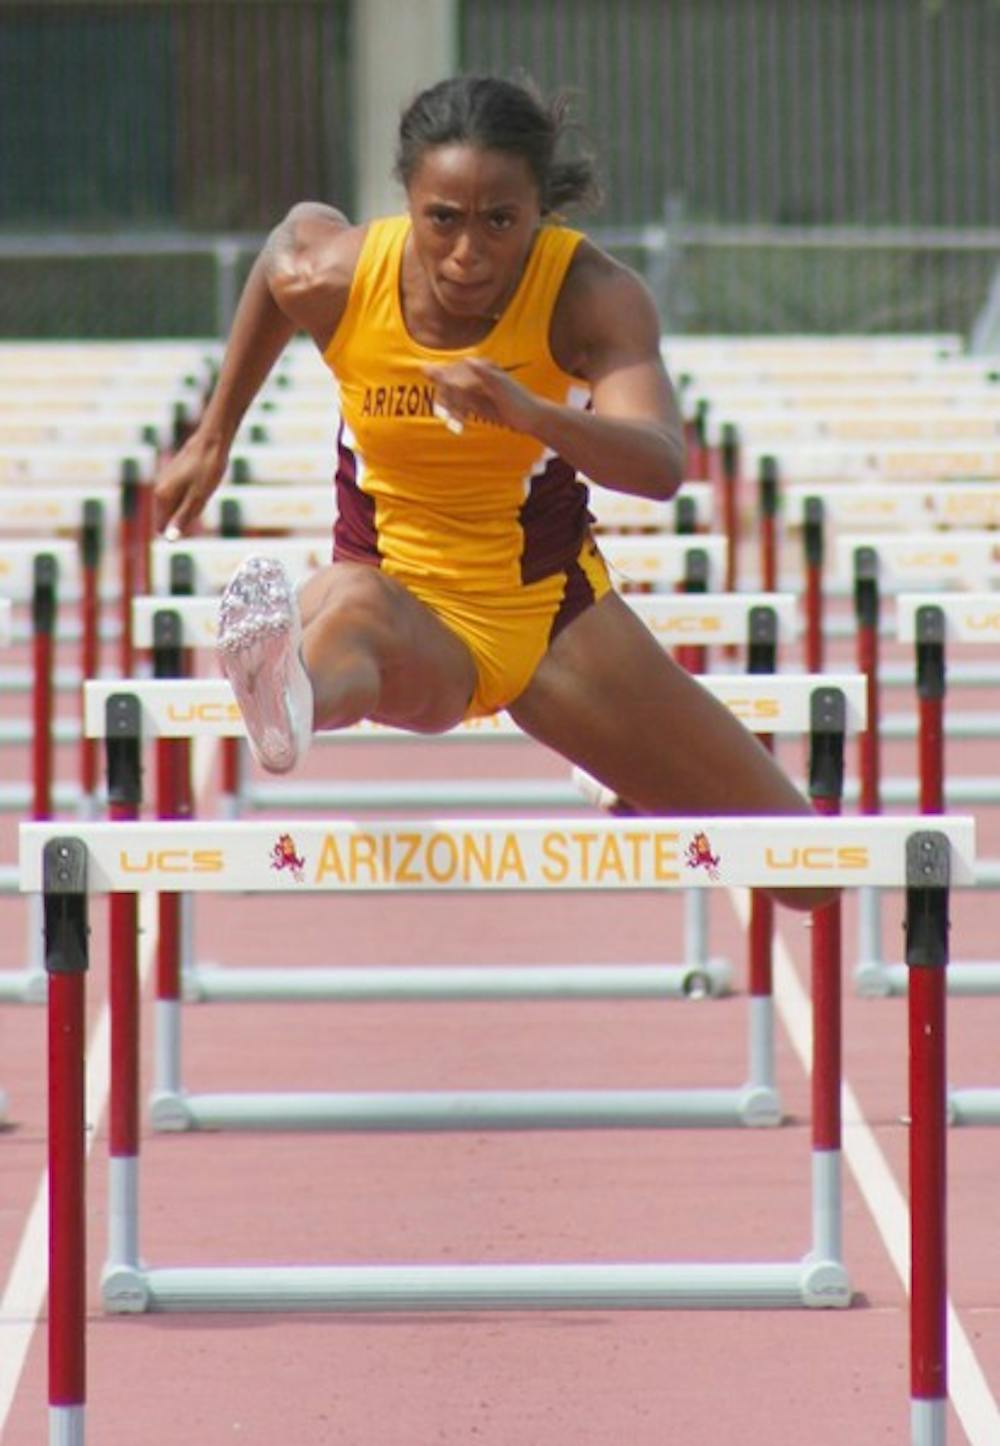 Team Leader: ASU senior Jasmine Chaney lunges over the hurdle during the 100-meter hurdles on Saturday in Tempe. She finished second in the race behind a runner for the Stellar Athletic Club. (Photo by Lisa Bartoli)